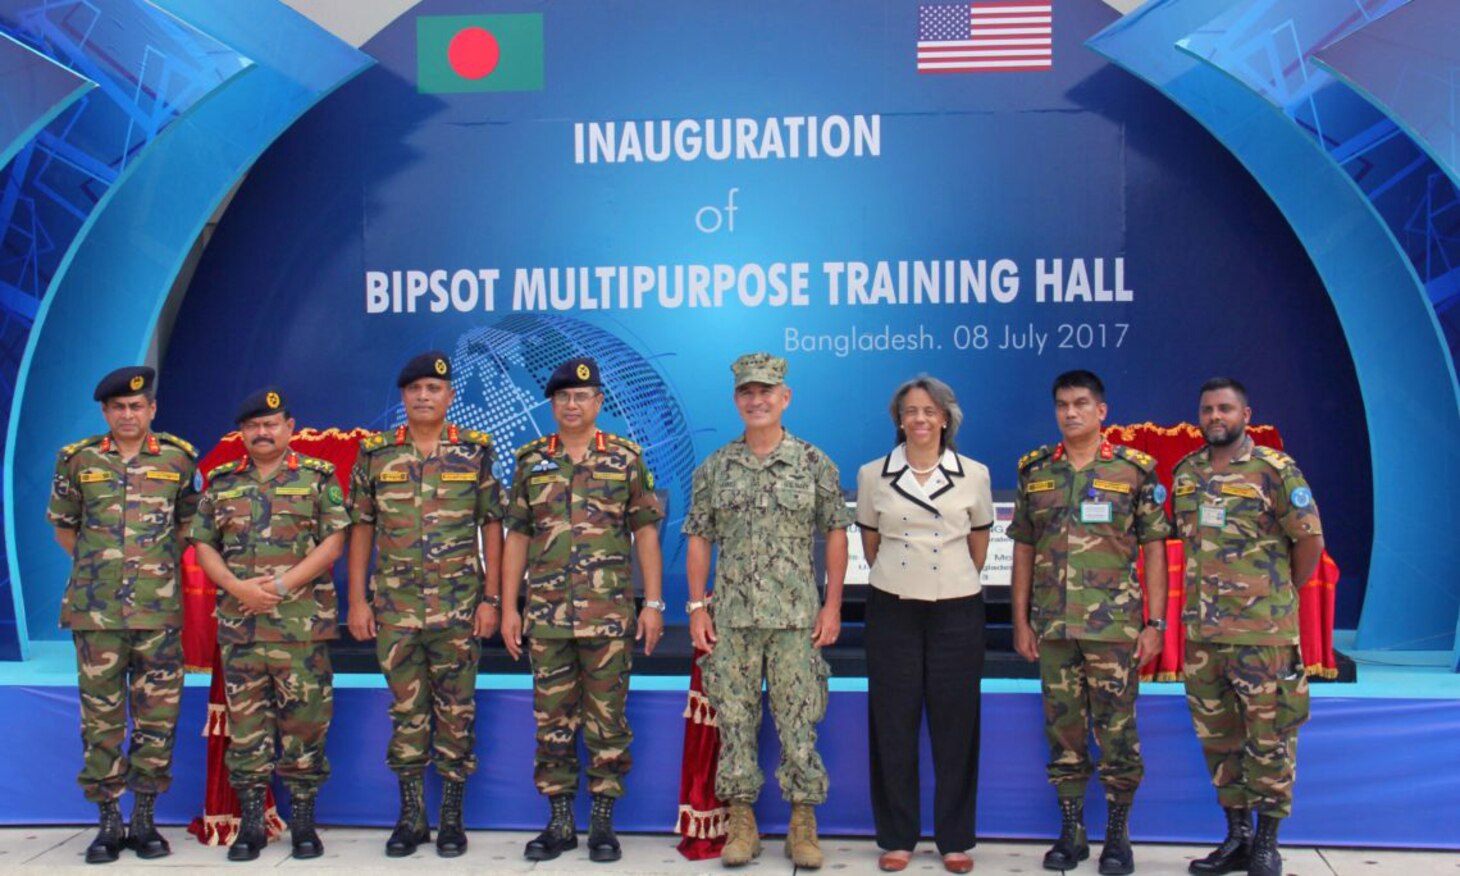 Commander of U.S. Pacific Command visits Bangladesh, July 8, 2017.  This is Harris’ first visit to Bangladesh as PACOM commander. During the visit he met with counterparts and government officials for discussions on military cooperation and regional security initiatives in the Indo-Asia Pacific.  
